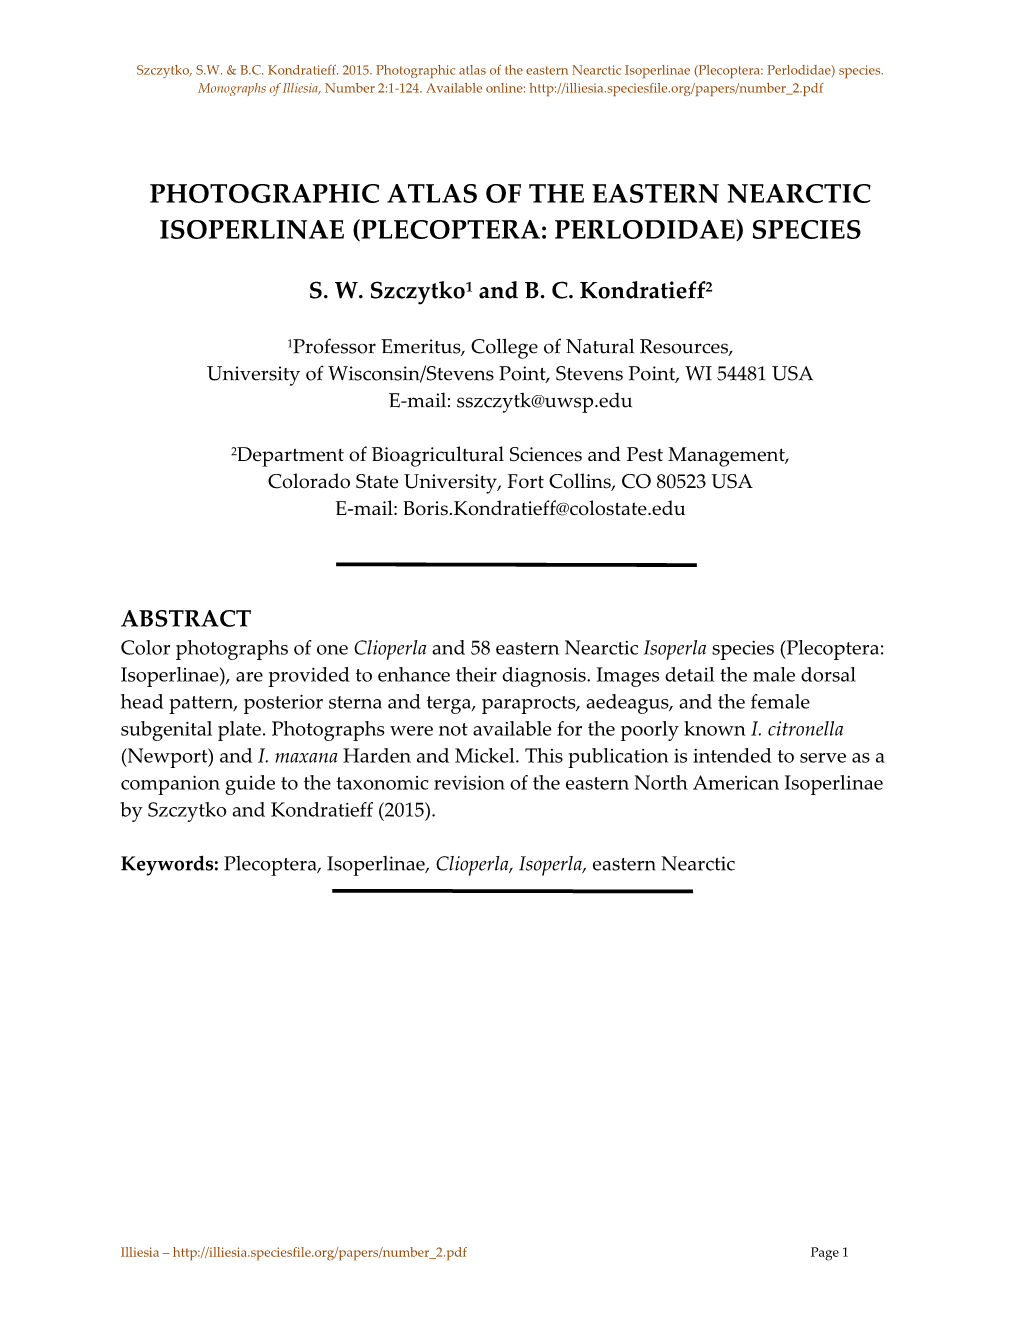 Photographic Atlas of the Eastern Nearctic Isoperlinae (Plecoptera: Perlodidae) Species